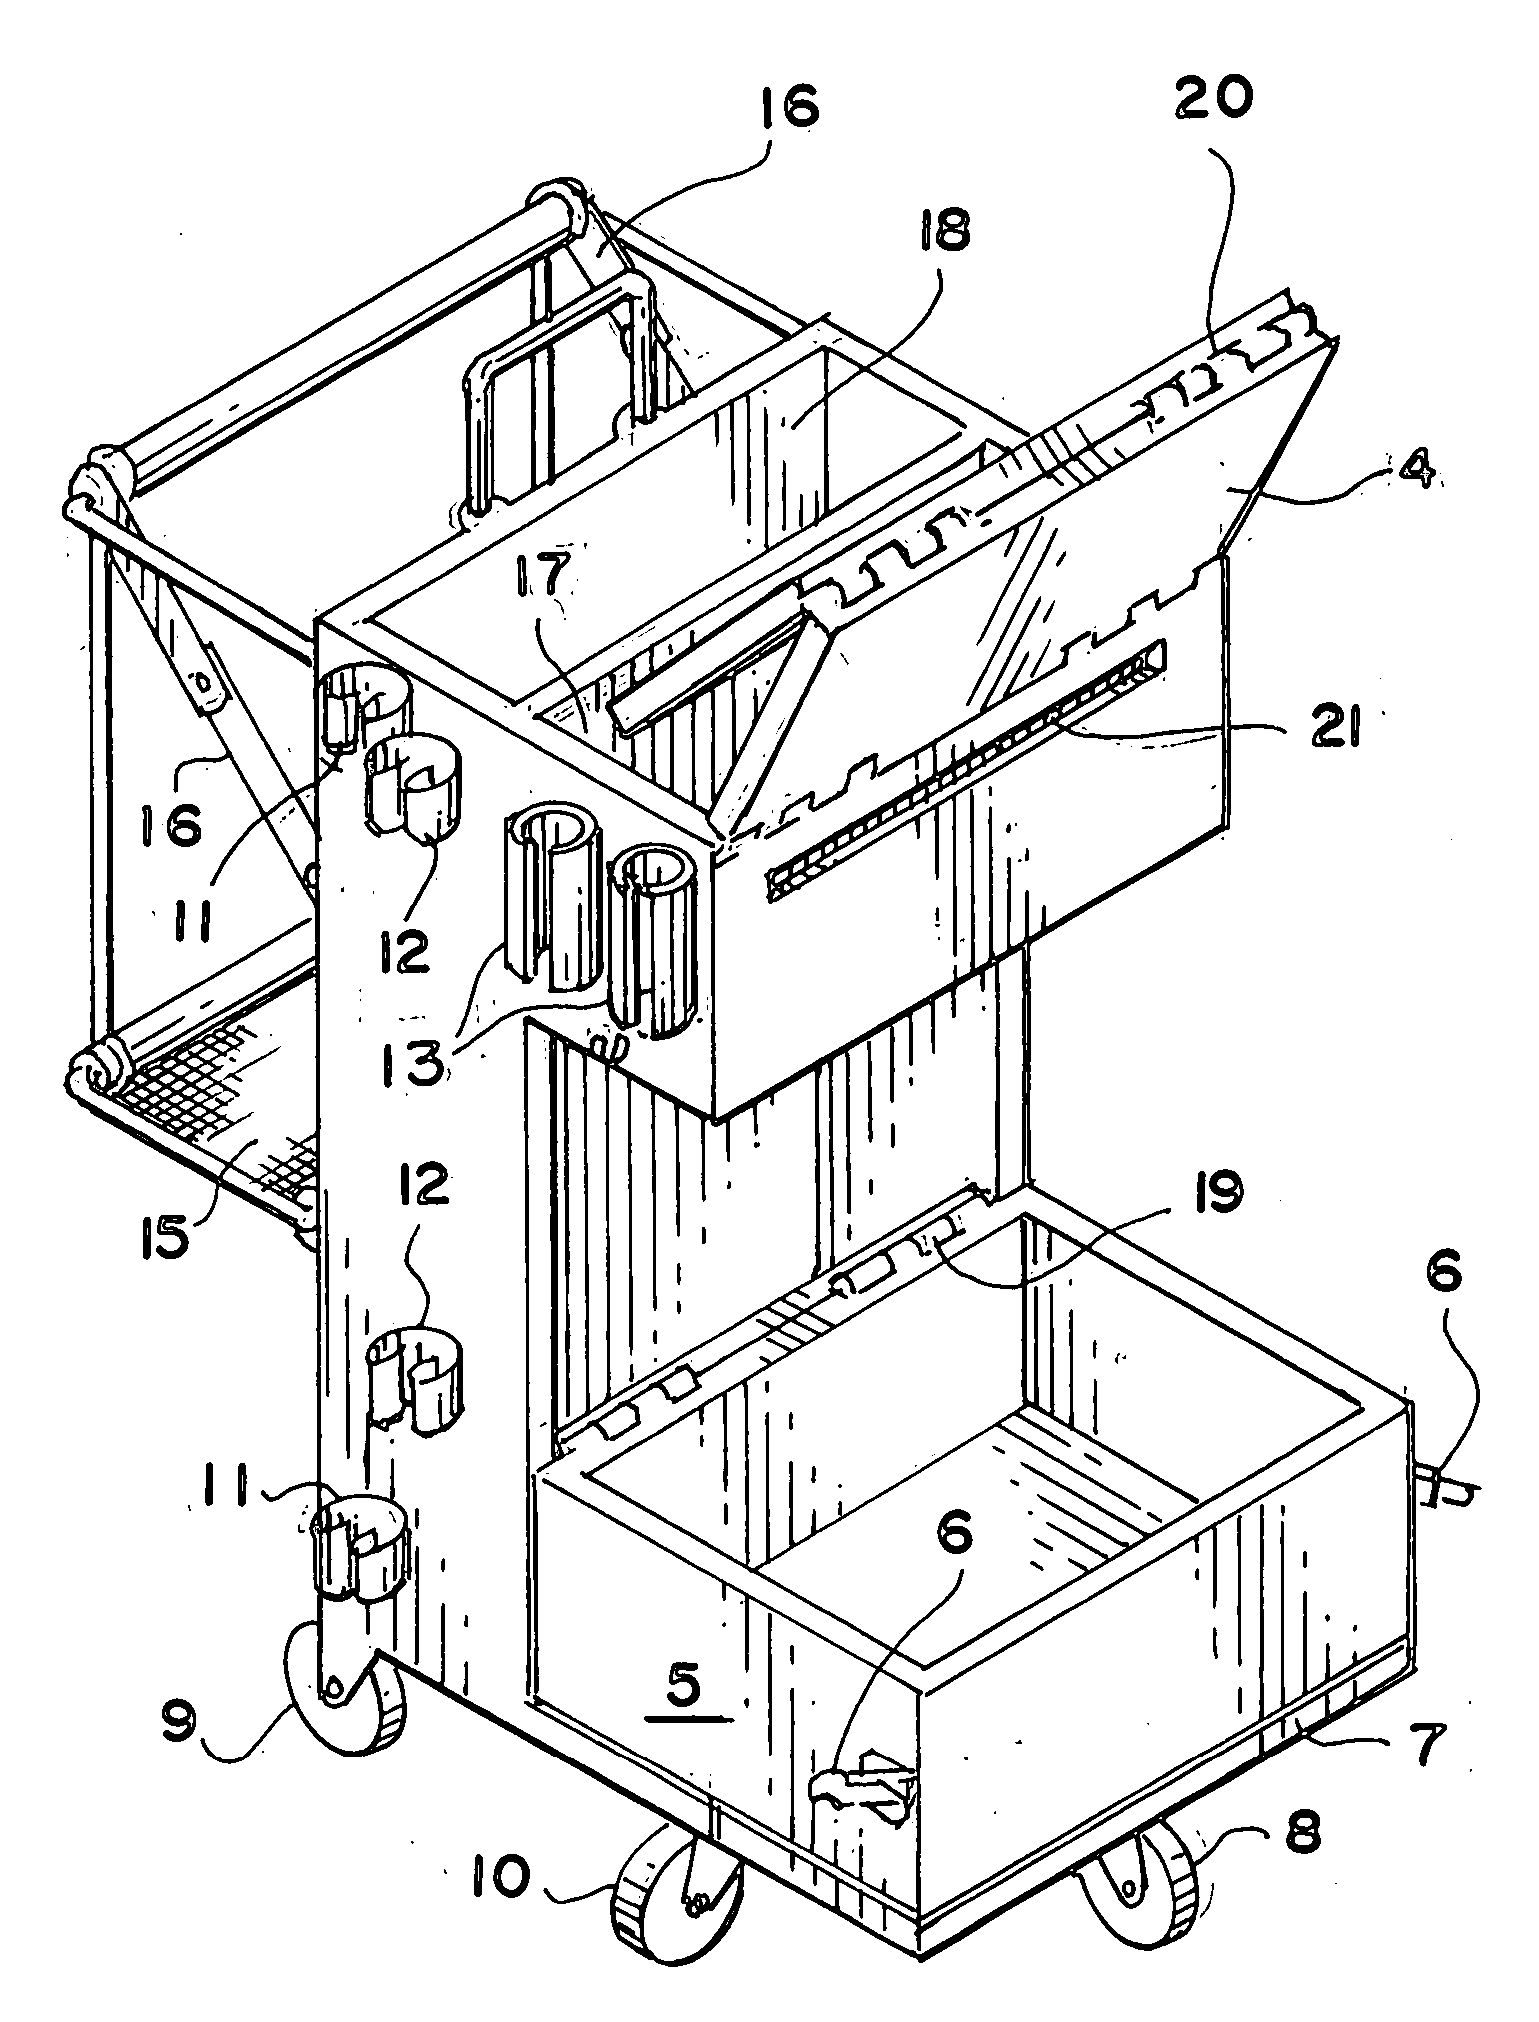 Self-contained utility cart